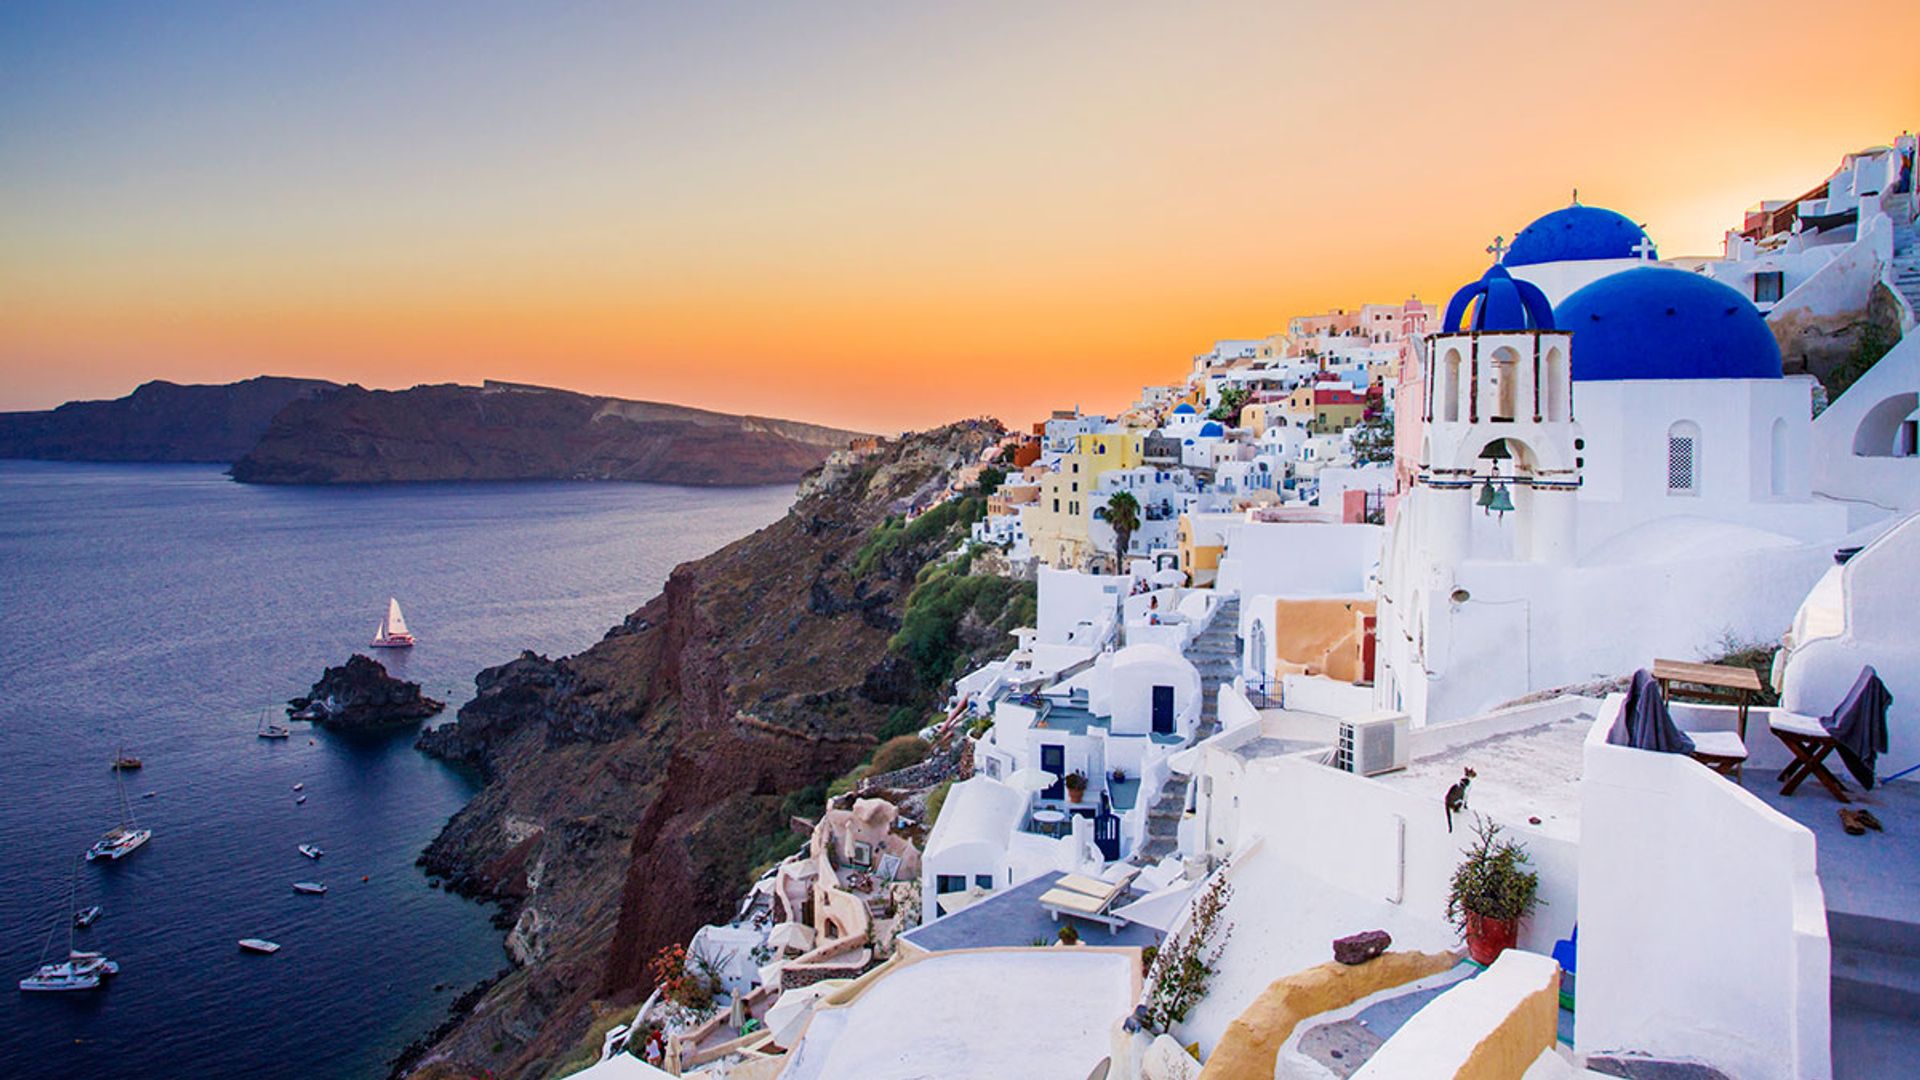 Private pools, luxury suites and pink sunsets make this the dreamiest hotel in Santorini